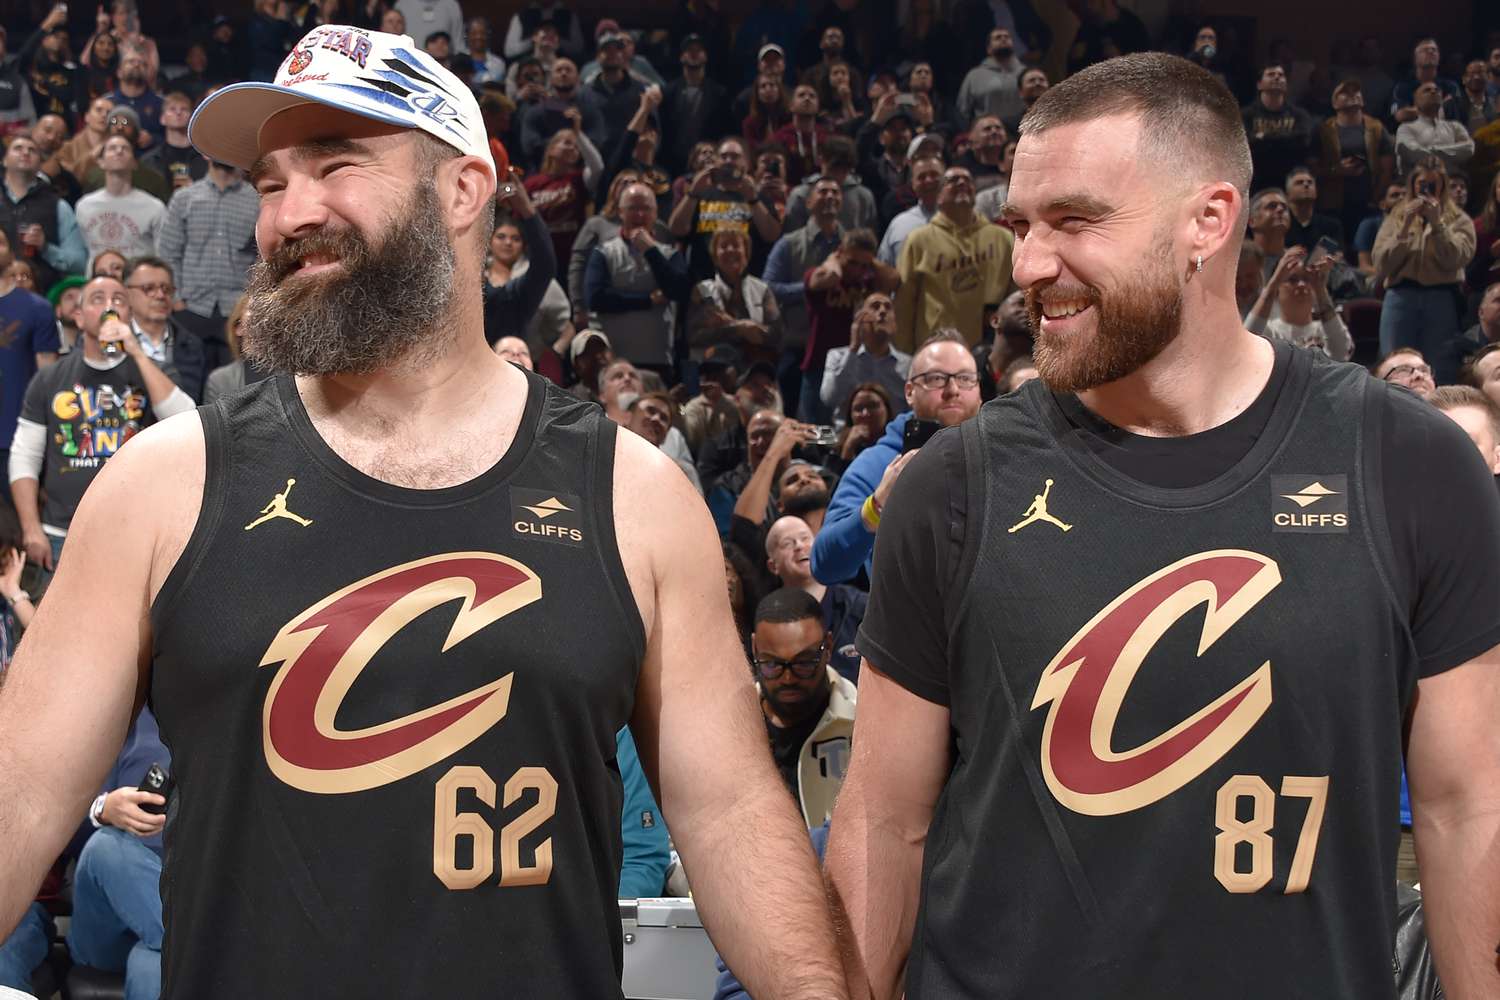 travis-and-jason-kelce-bobbleheads-take-center-stage-at-cavs-game